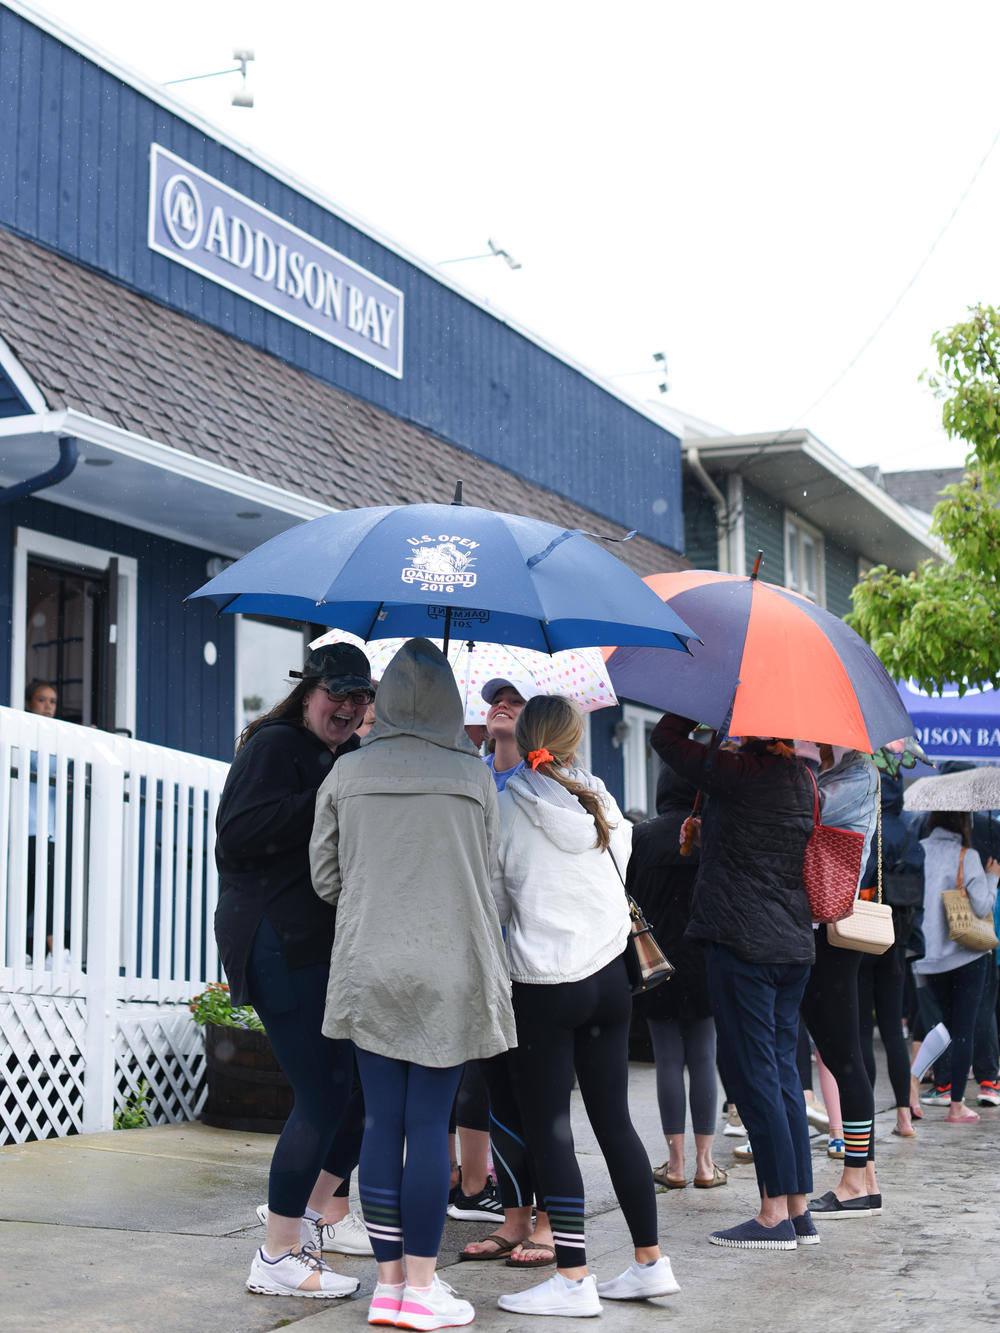 Shoppers line up for the grand opening of Addison Bay's first physical store on a rainy May day in Avalon, N.J.